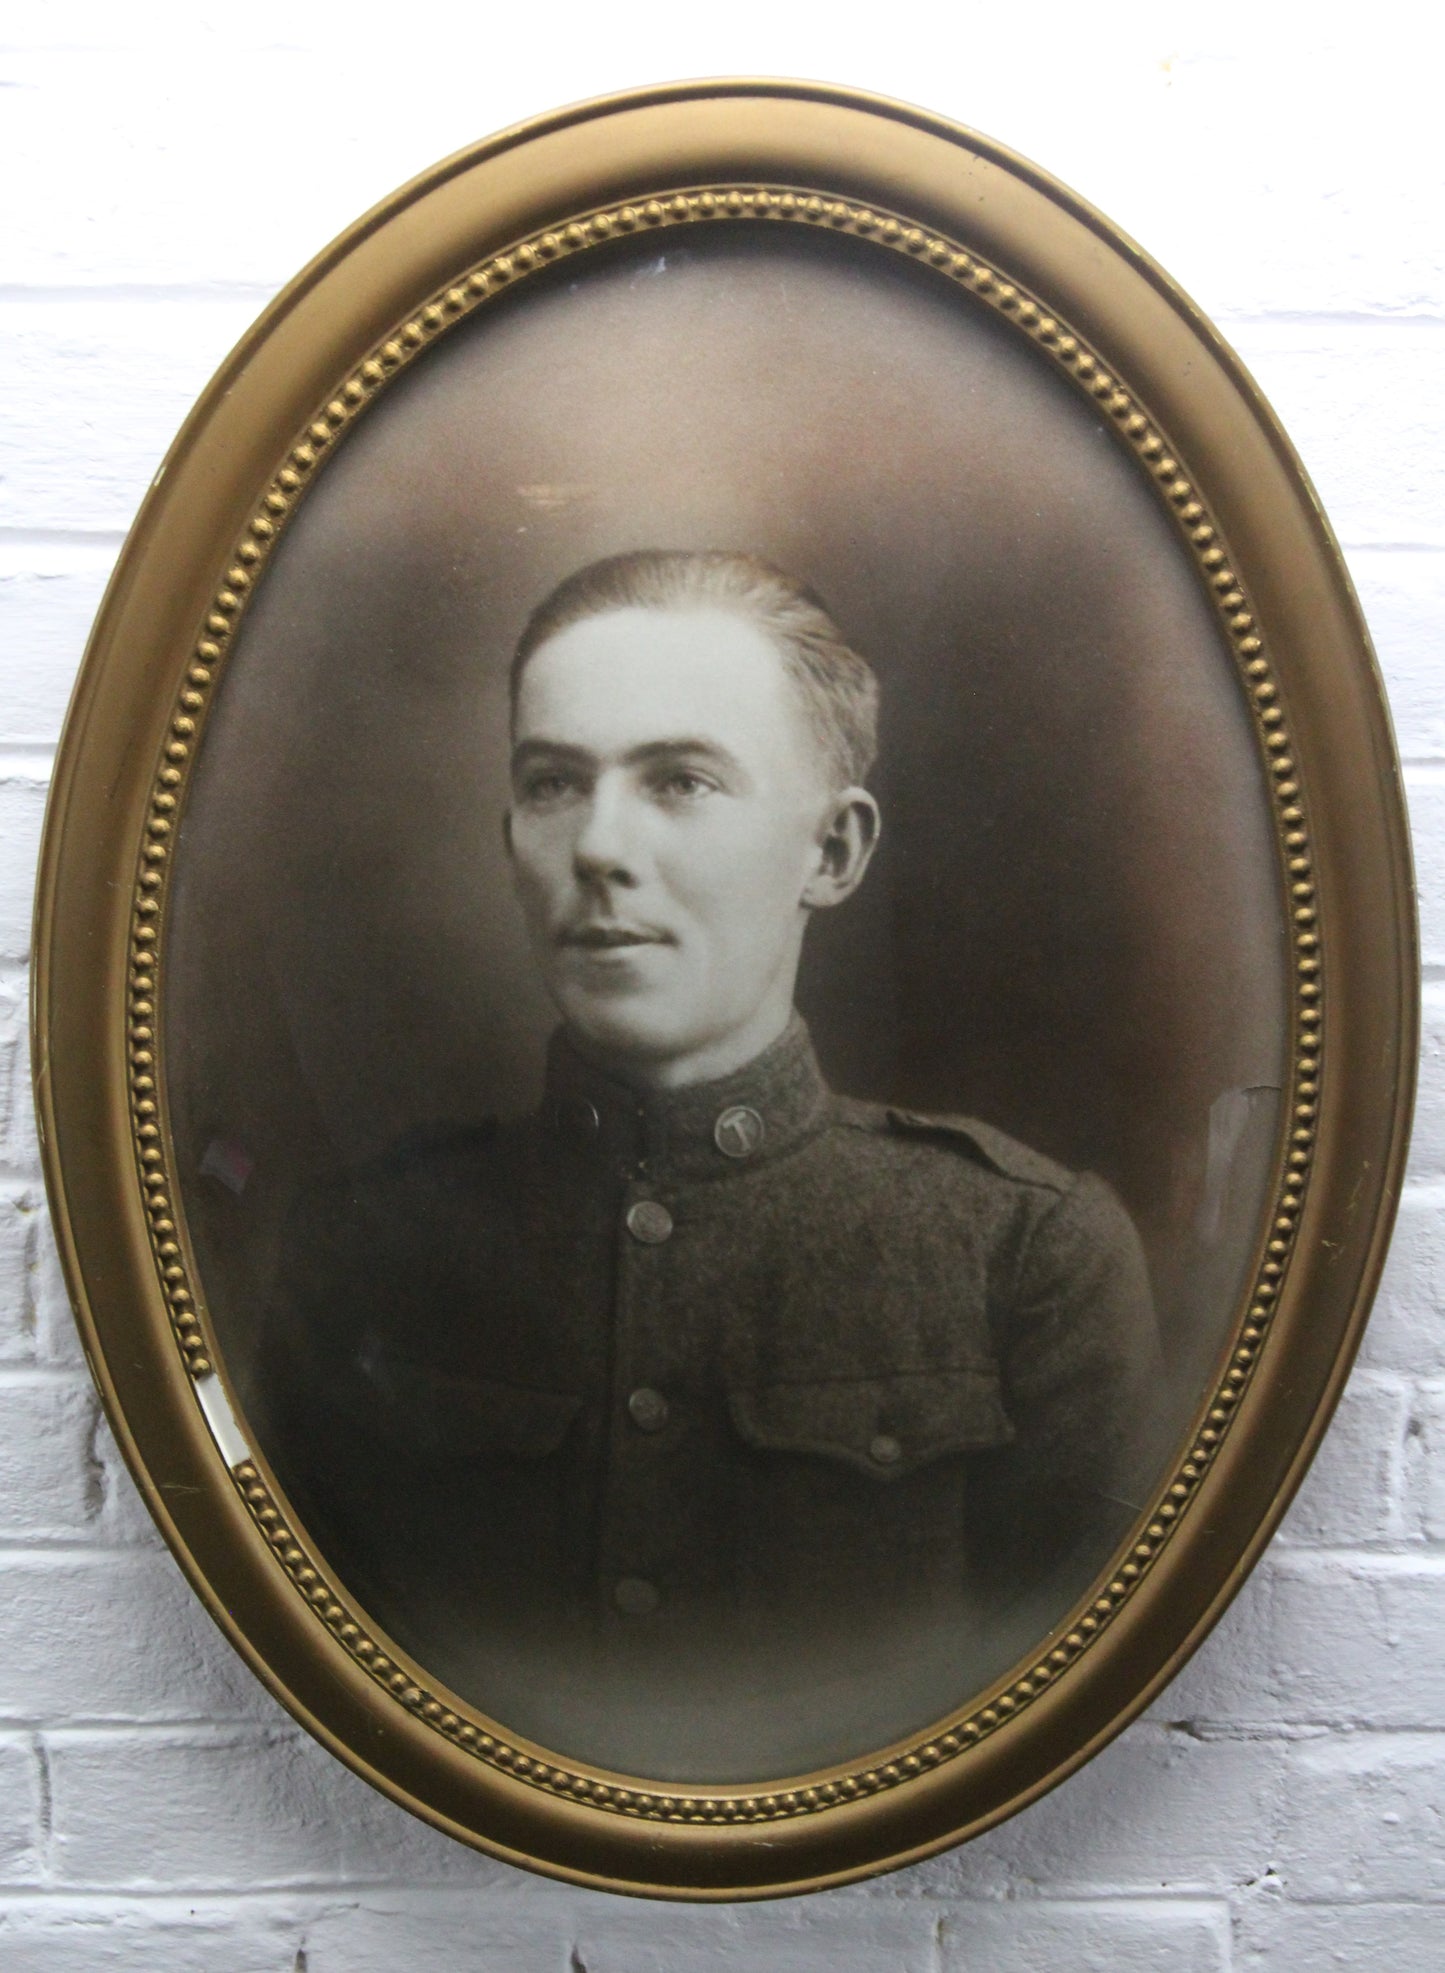 Portrait Photograph of Soldier Earl C. Wall in Bubble Frame, France, January 1, 1919 - 16" x 22"